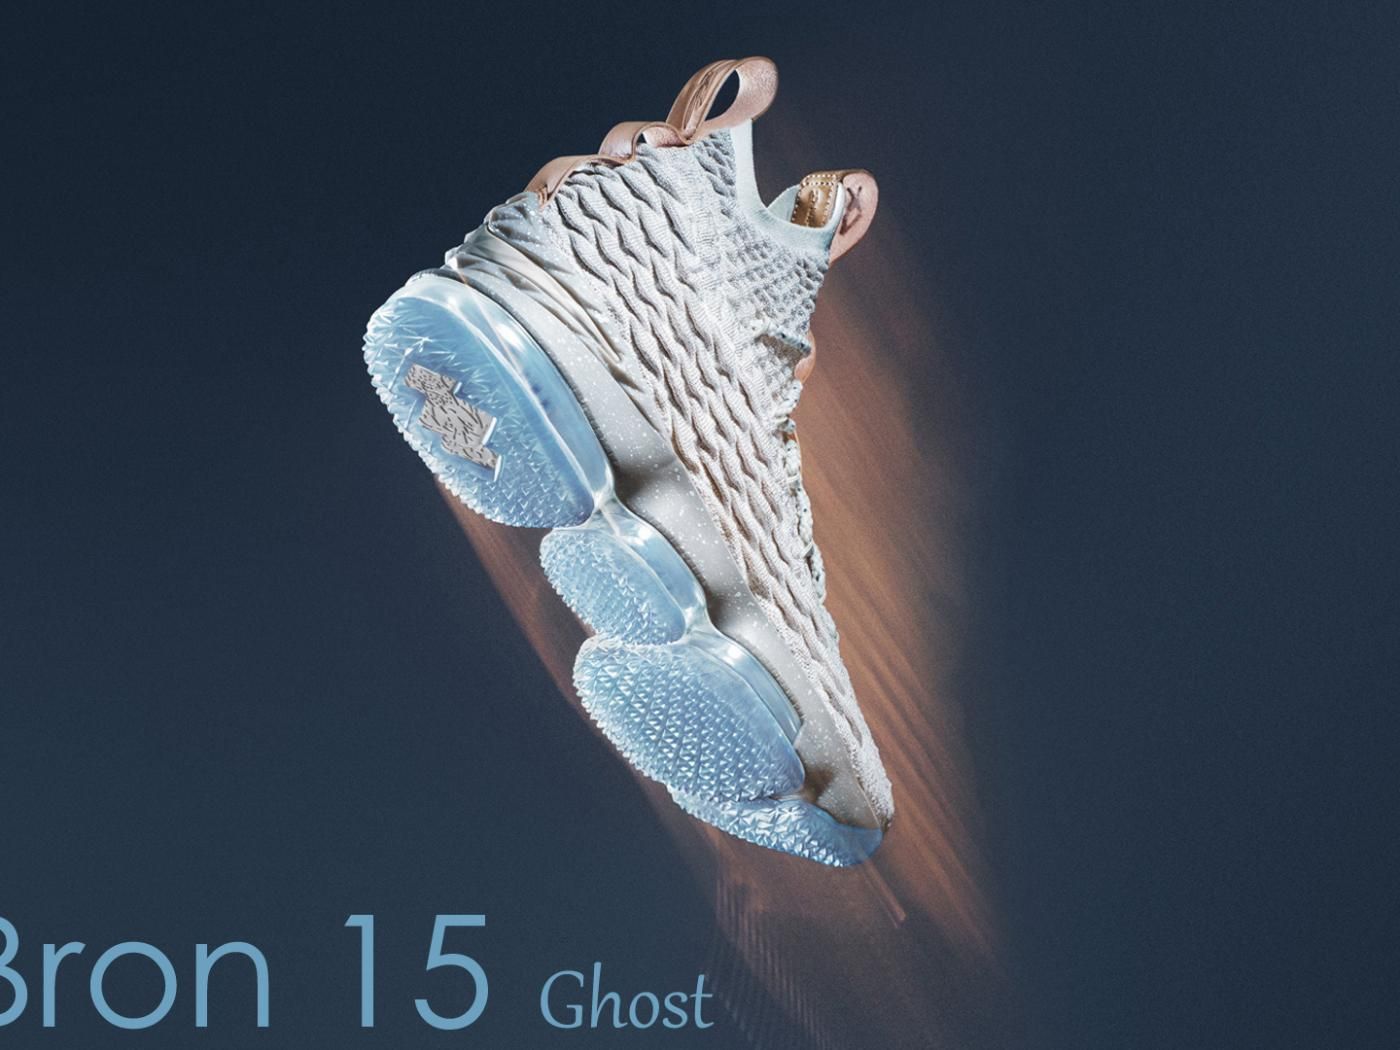 LeBron James Shoes Wallpaper with Nike LeBron 15 Ghost